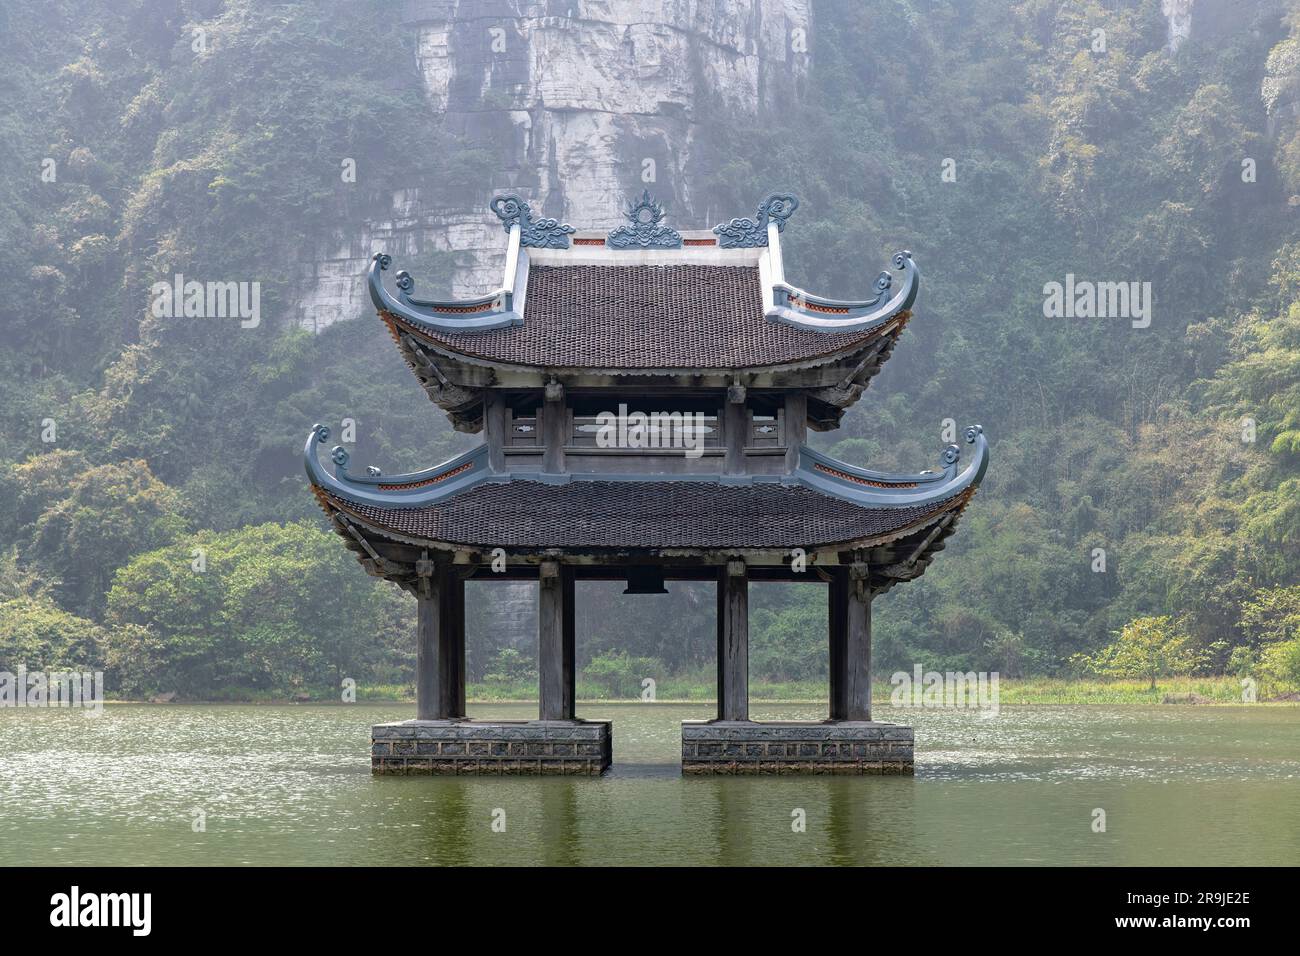 Close up of a temple in the water in front of Vu Lam Palace in Red River Delta of Ninh Bin, Vietnam giving impression it seems to float and is surroun Stock Photo